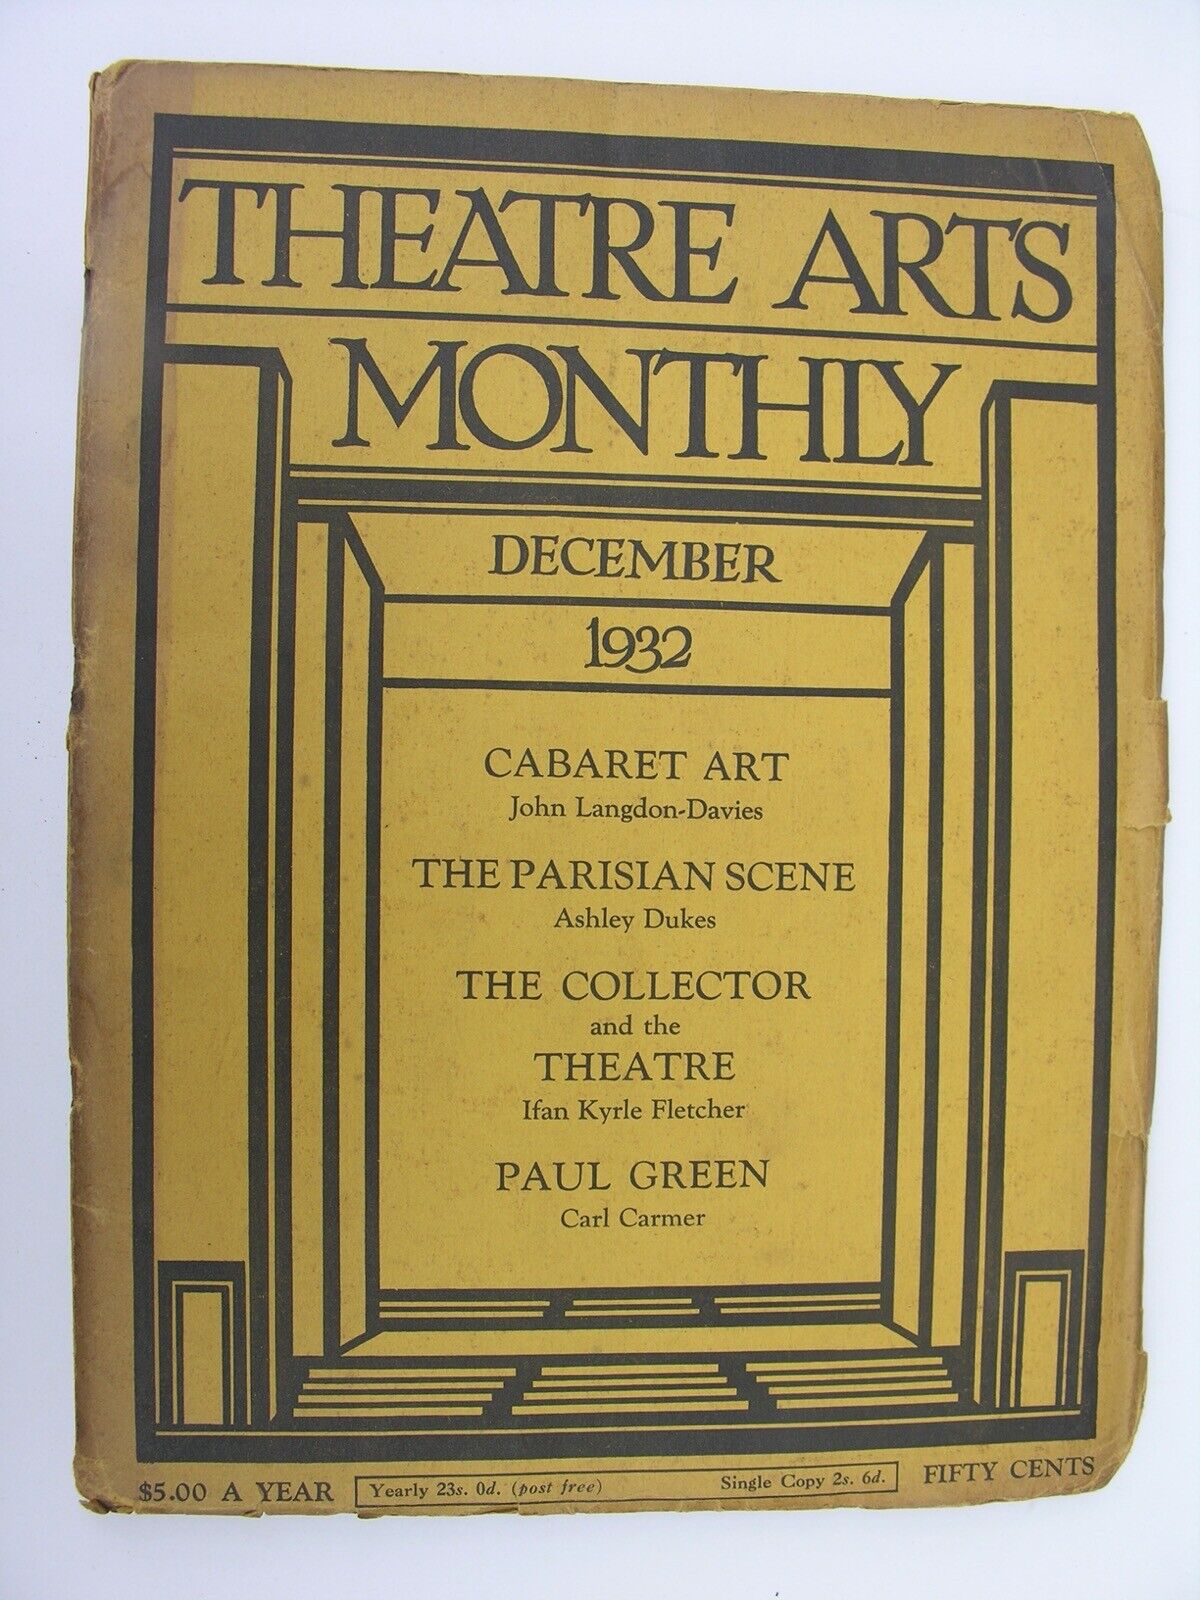 THEATRE ARTS MONTHLY December 1932 Rachel Crothers Charles Ciceri Paul Green